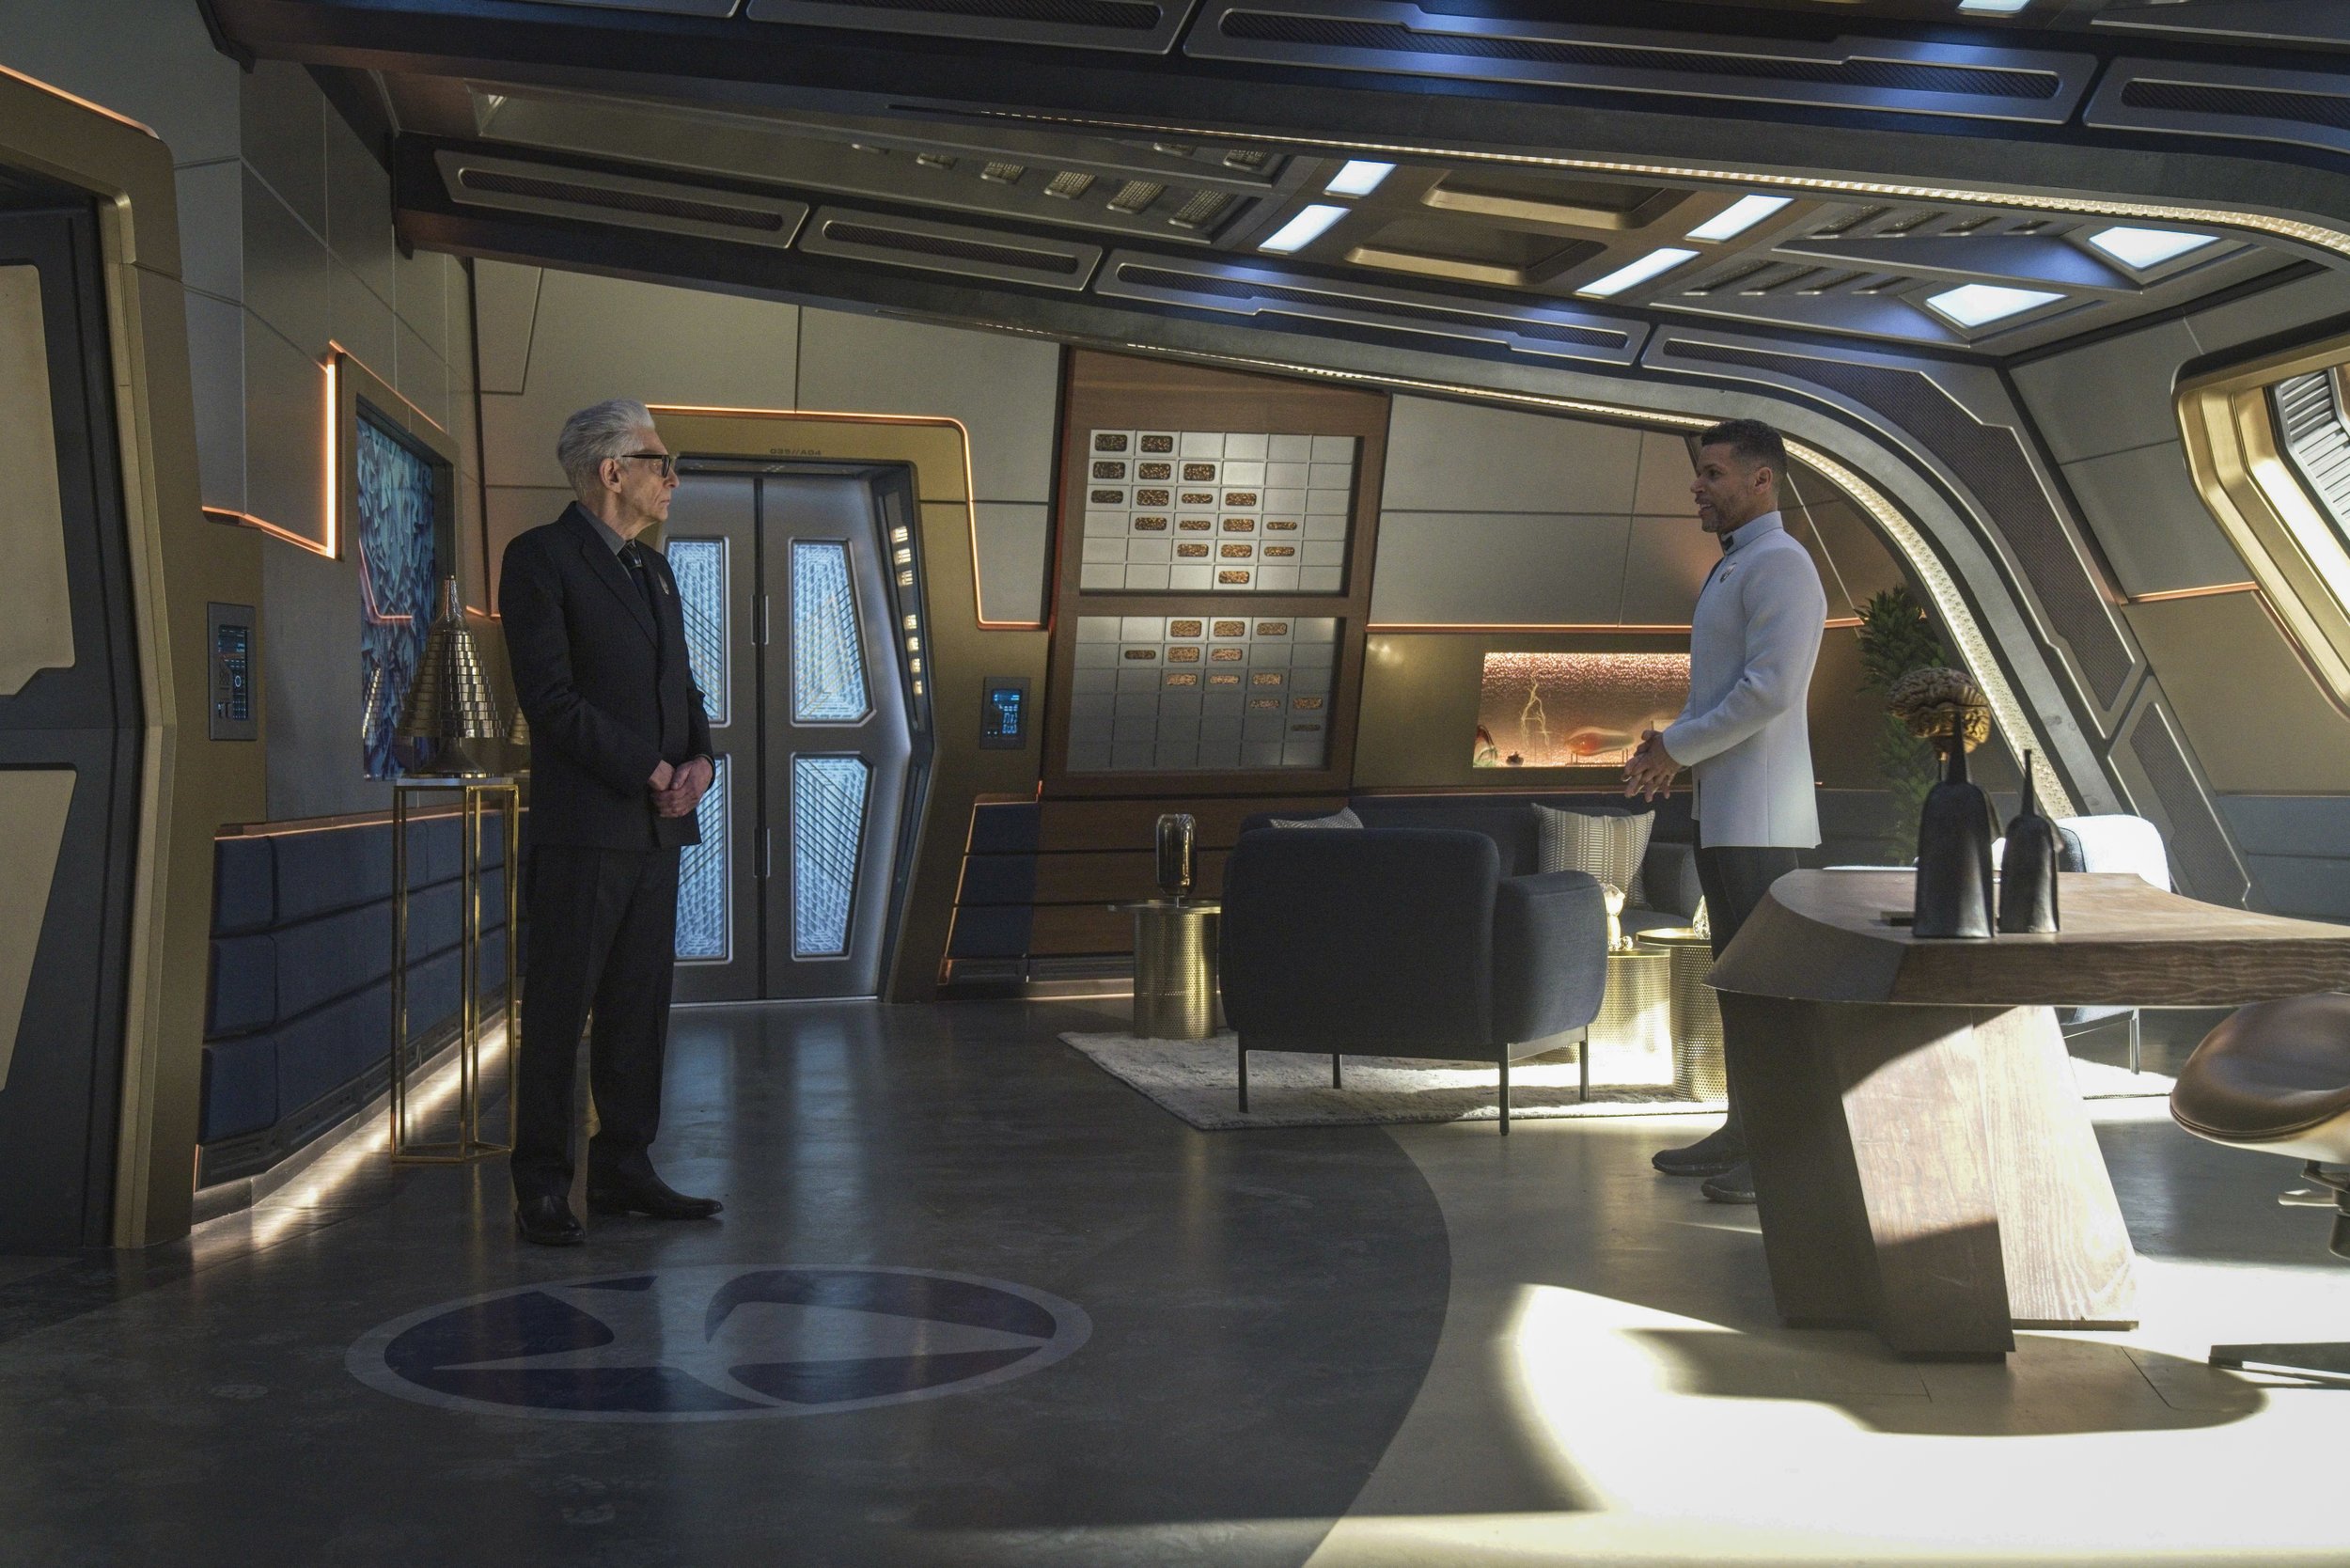   Pictured: David Cronenberg as Kovich and Wilson Cruz as Culber of the Paramount+ original series STAR TREK: DISCOVERY. Photo Cr: Michael Gibson/Paramount+ (C) 2021 CBS Interactive. All Rights Reserved.  